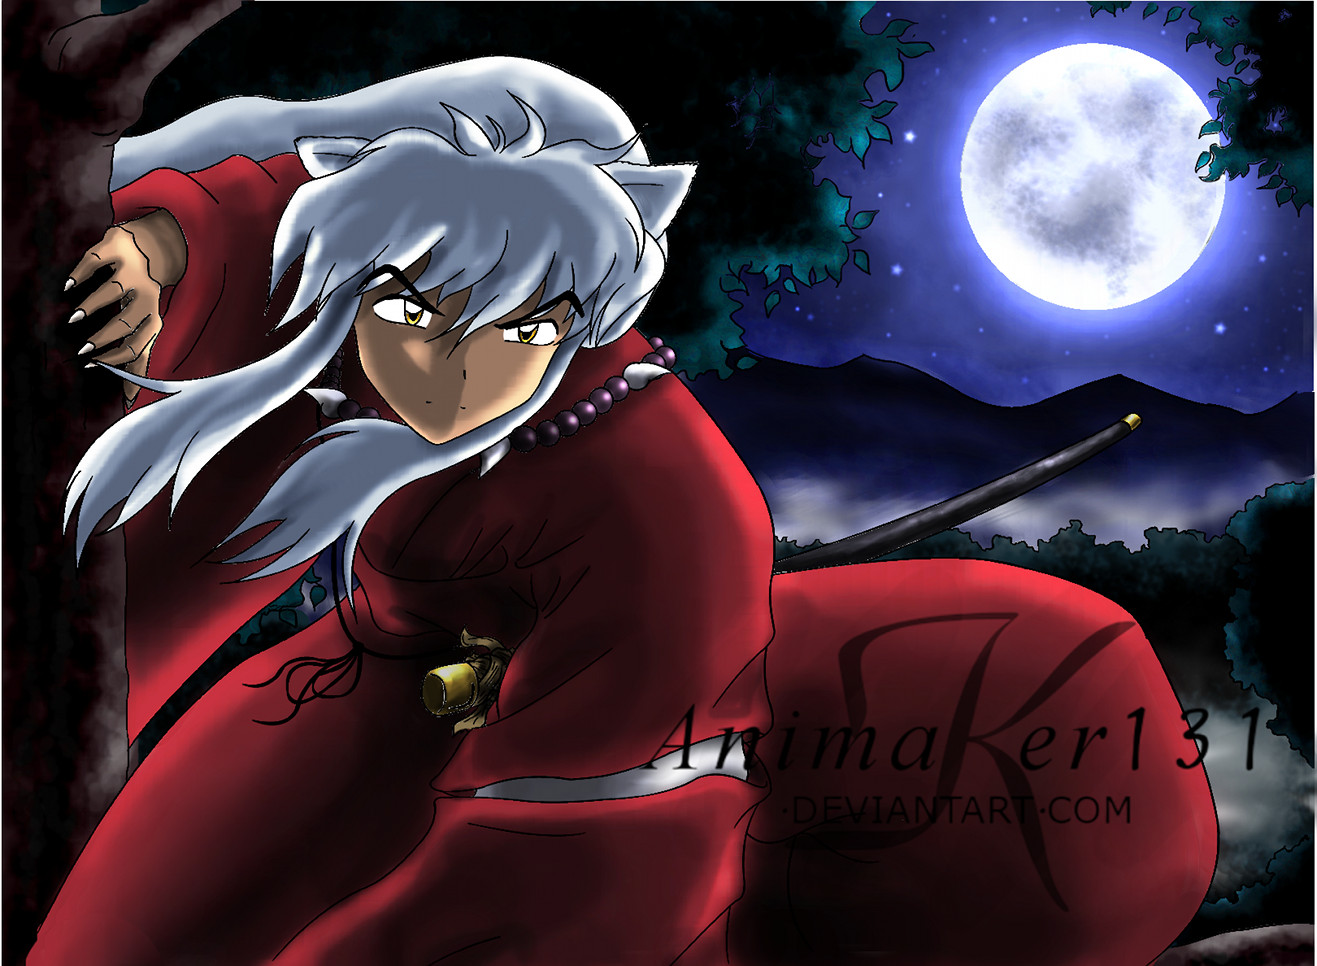 InuYasha's moon colored by Animaker131